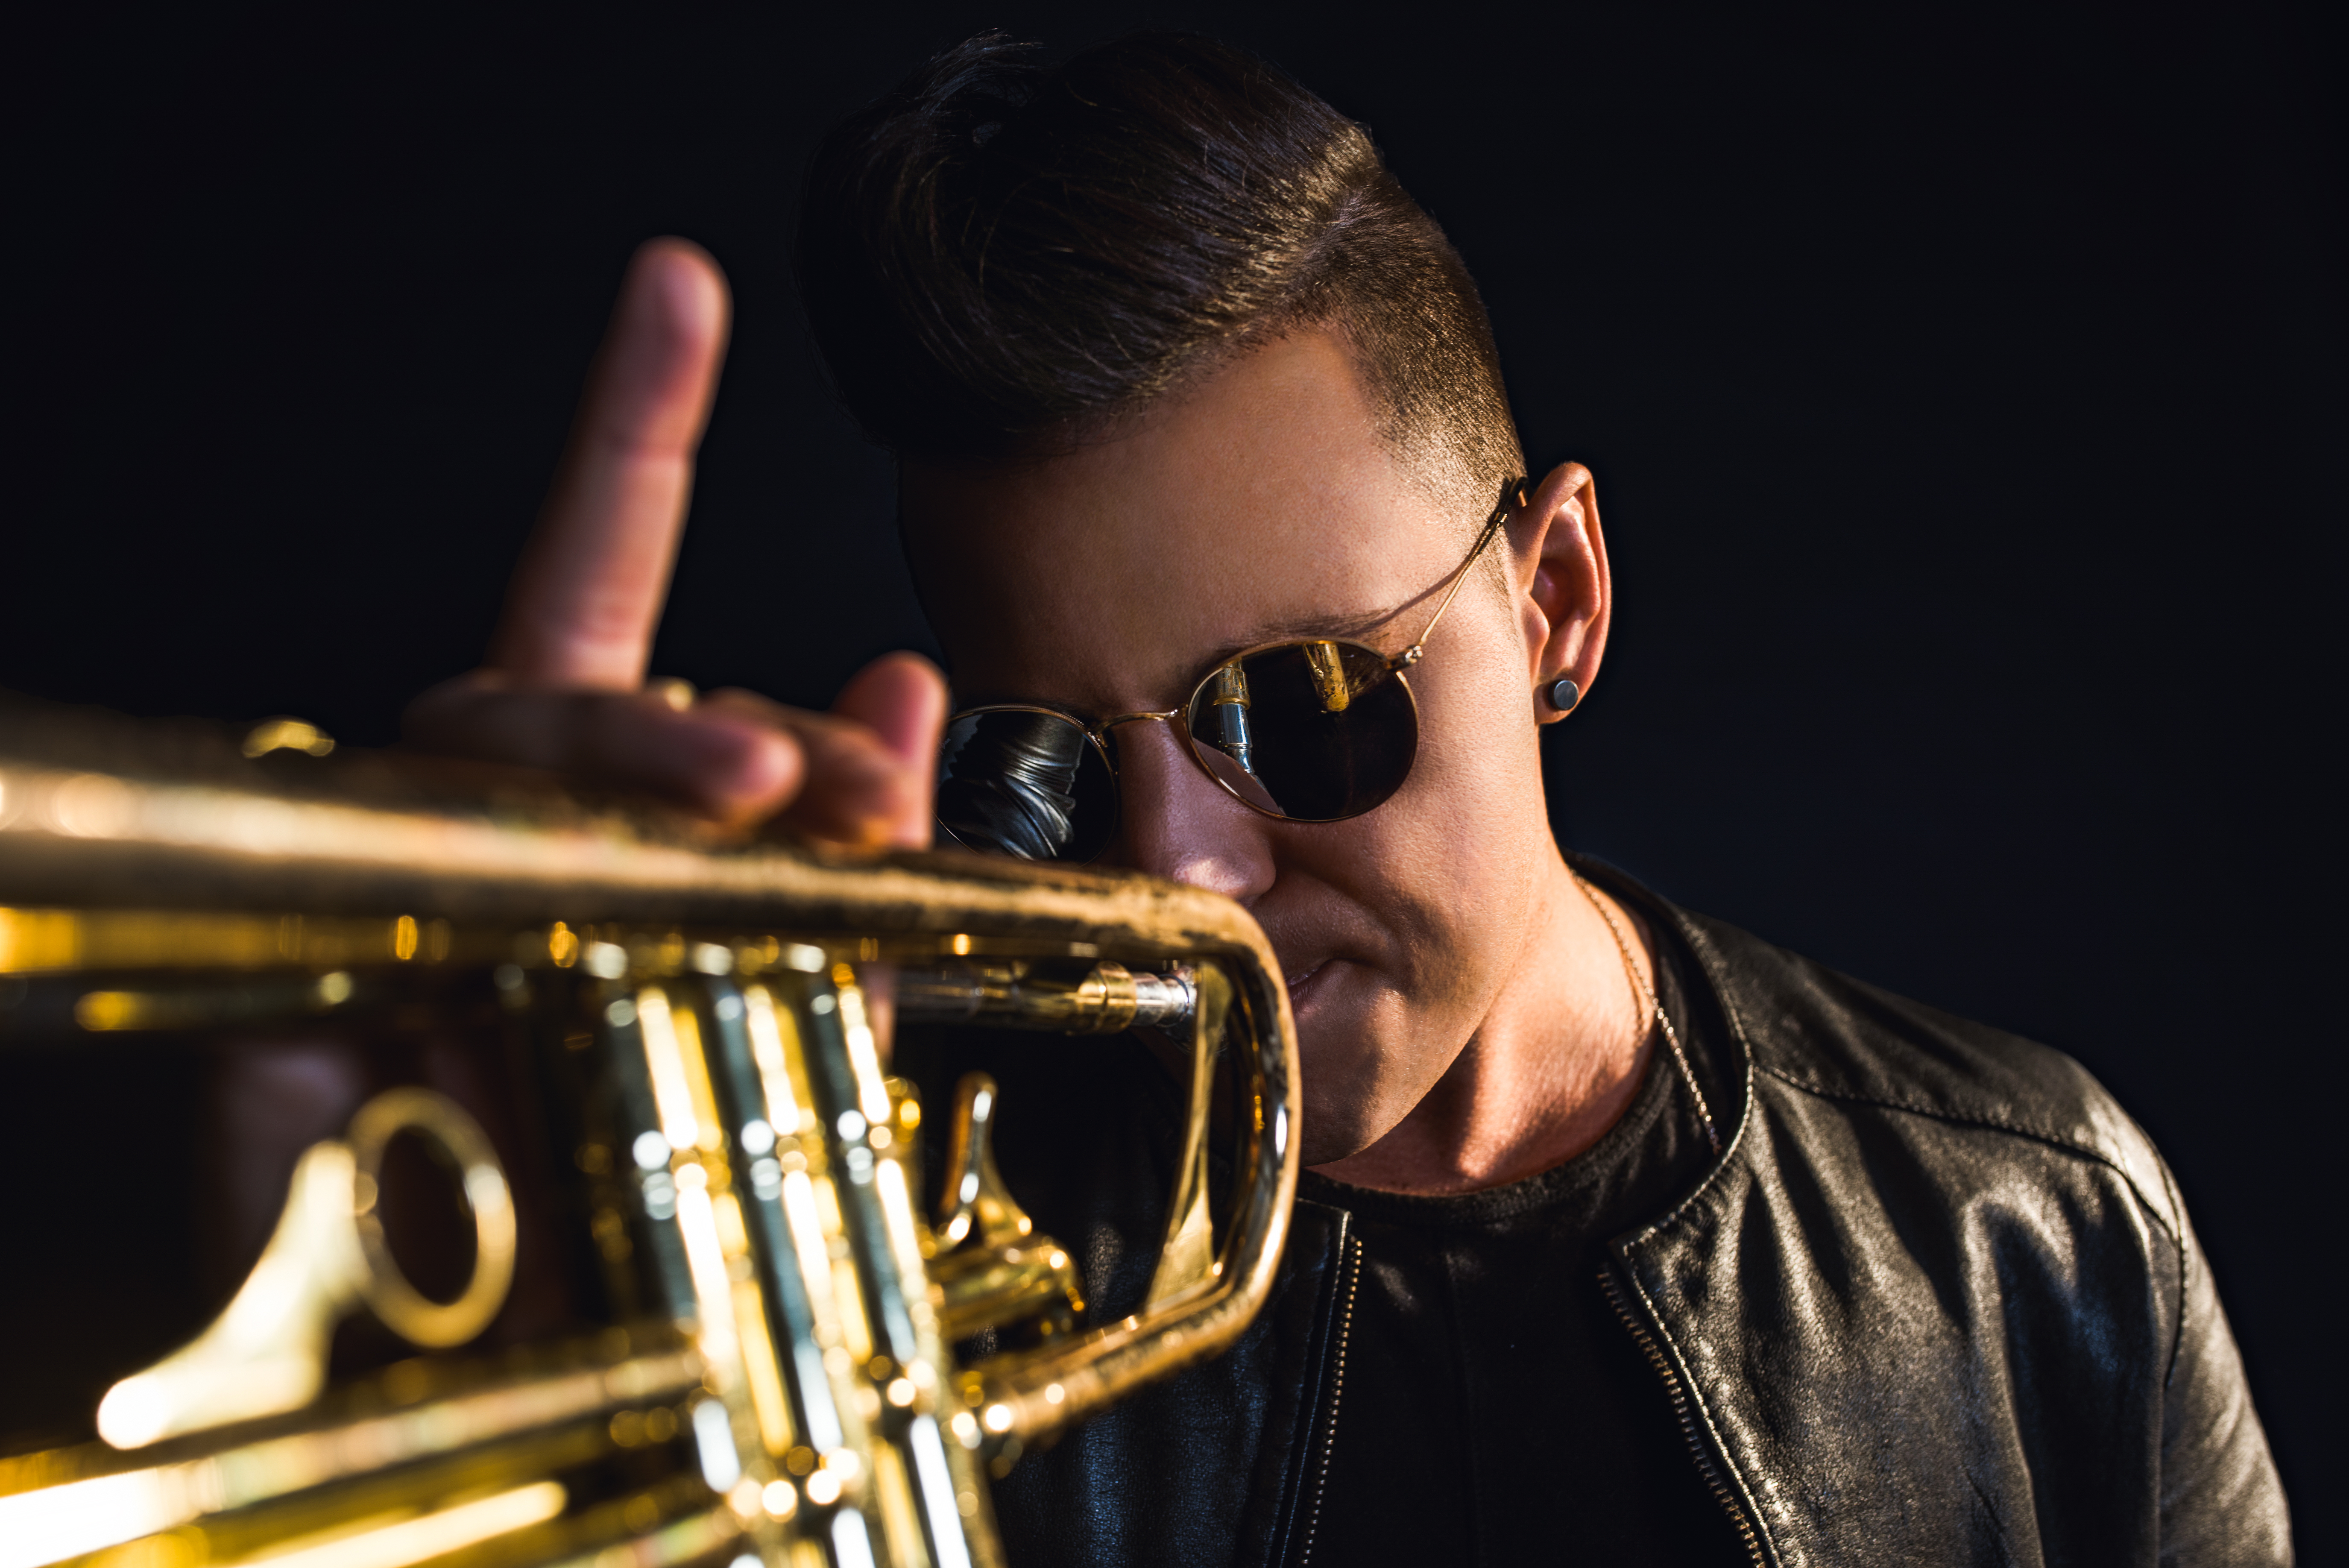 Musician Timmy Trumpet reacts after throwing out a ceremonial